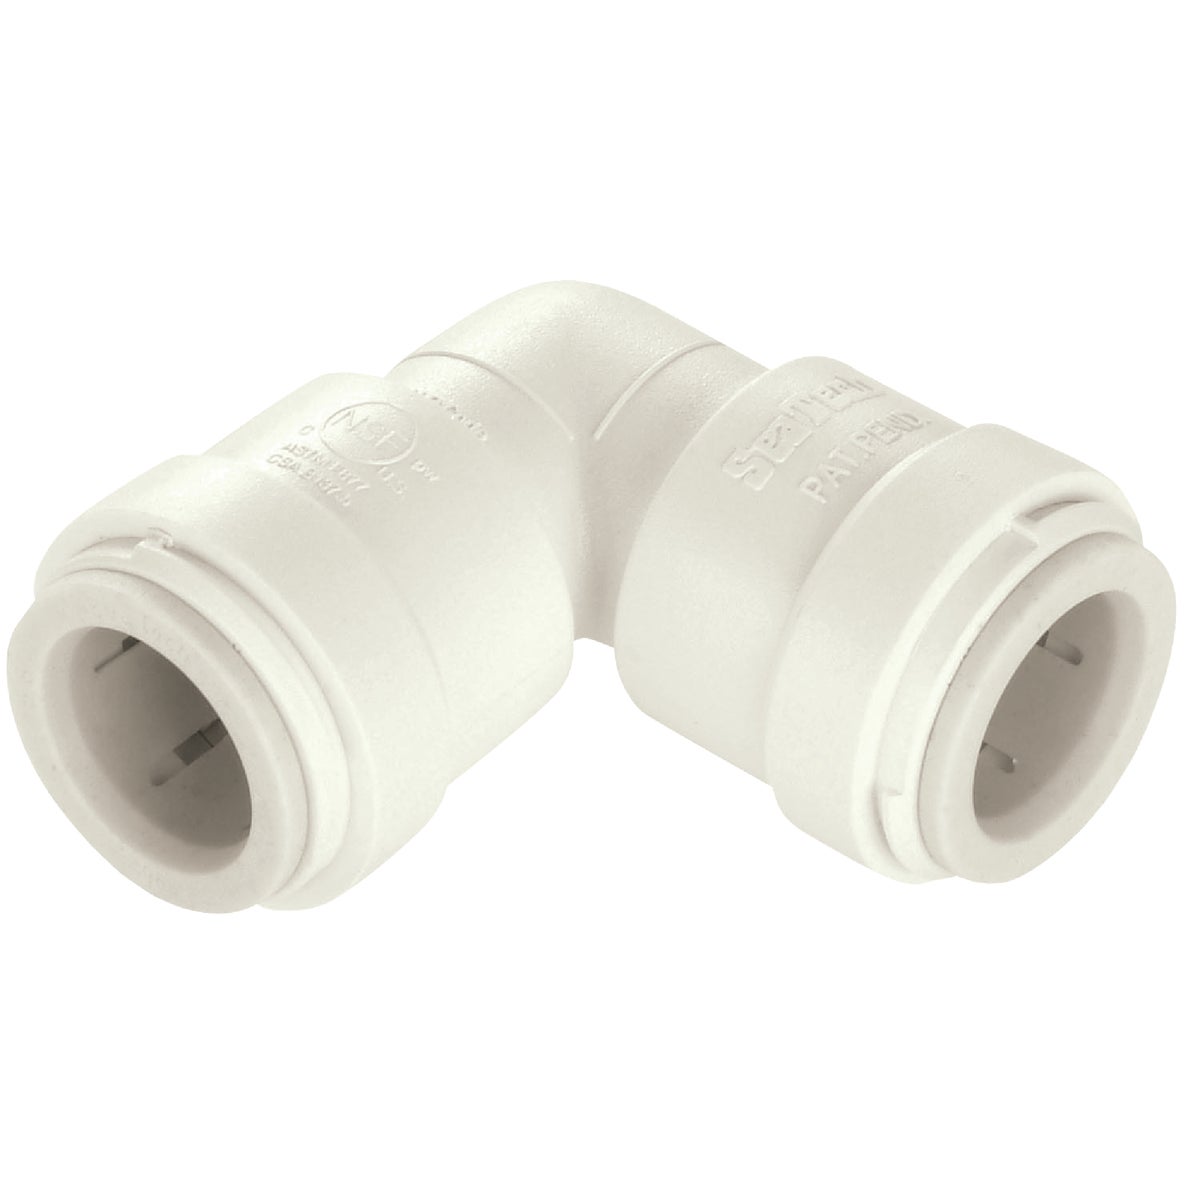 Watts 3/8 In. x 3/8 In. CTS 90 Deg. Quick Connect Plastic Elbow (1/4 Bend)